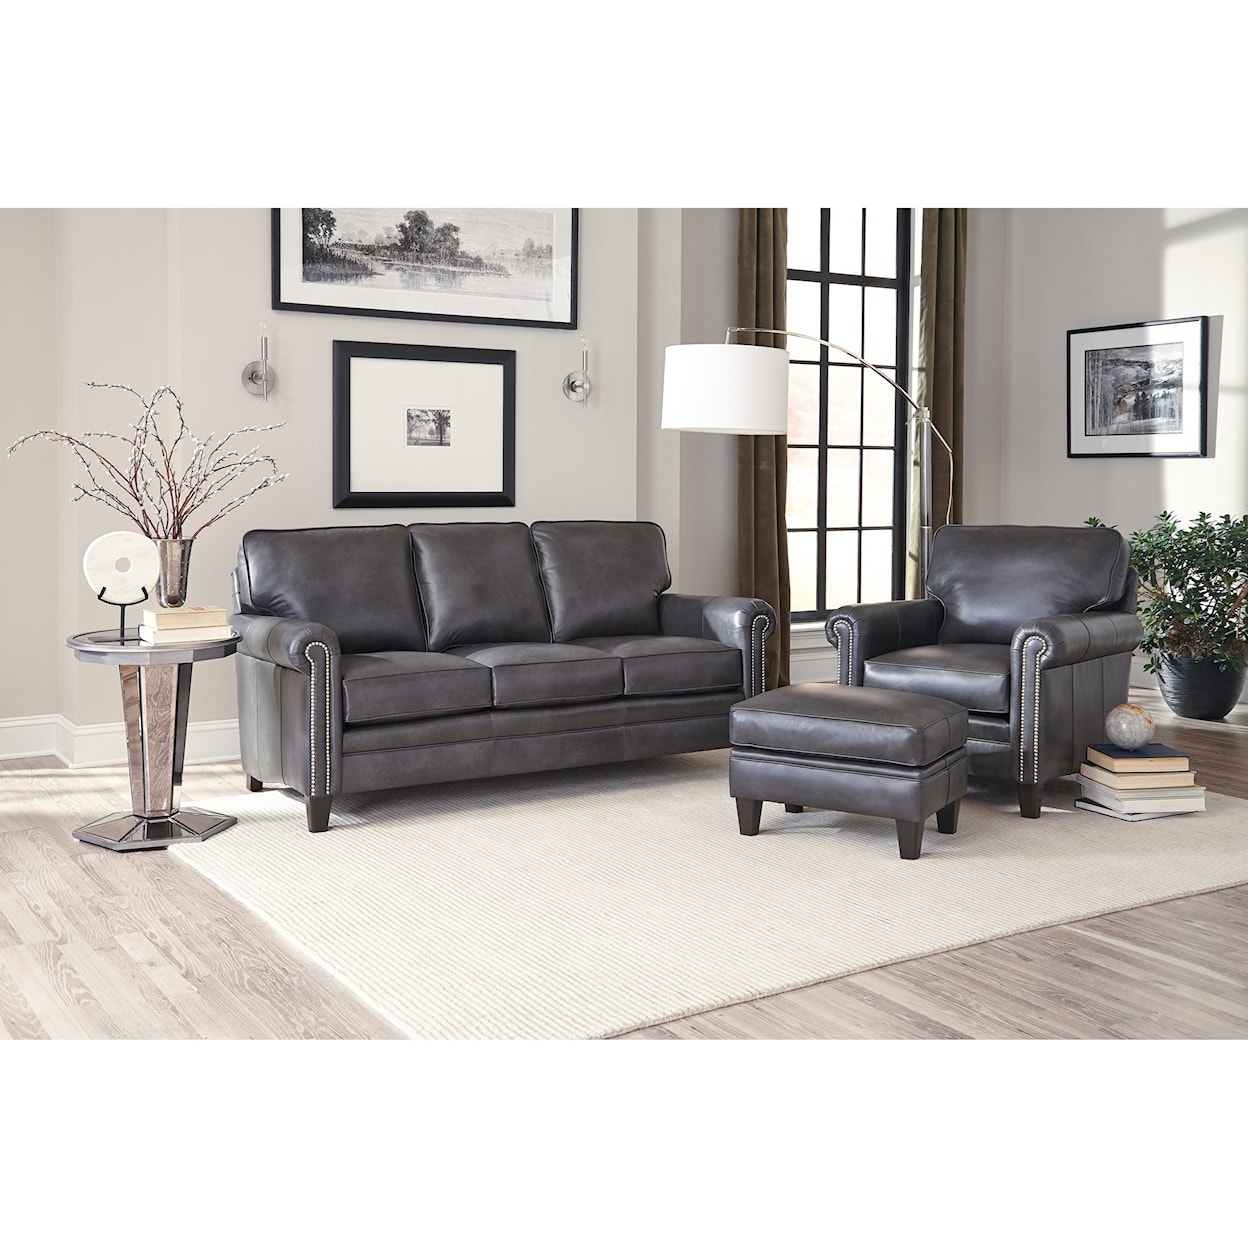 Smith Brothers 234 Stationary Living Room Group